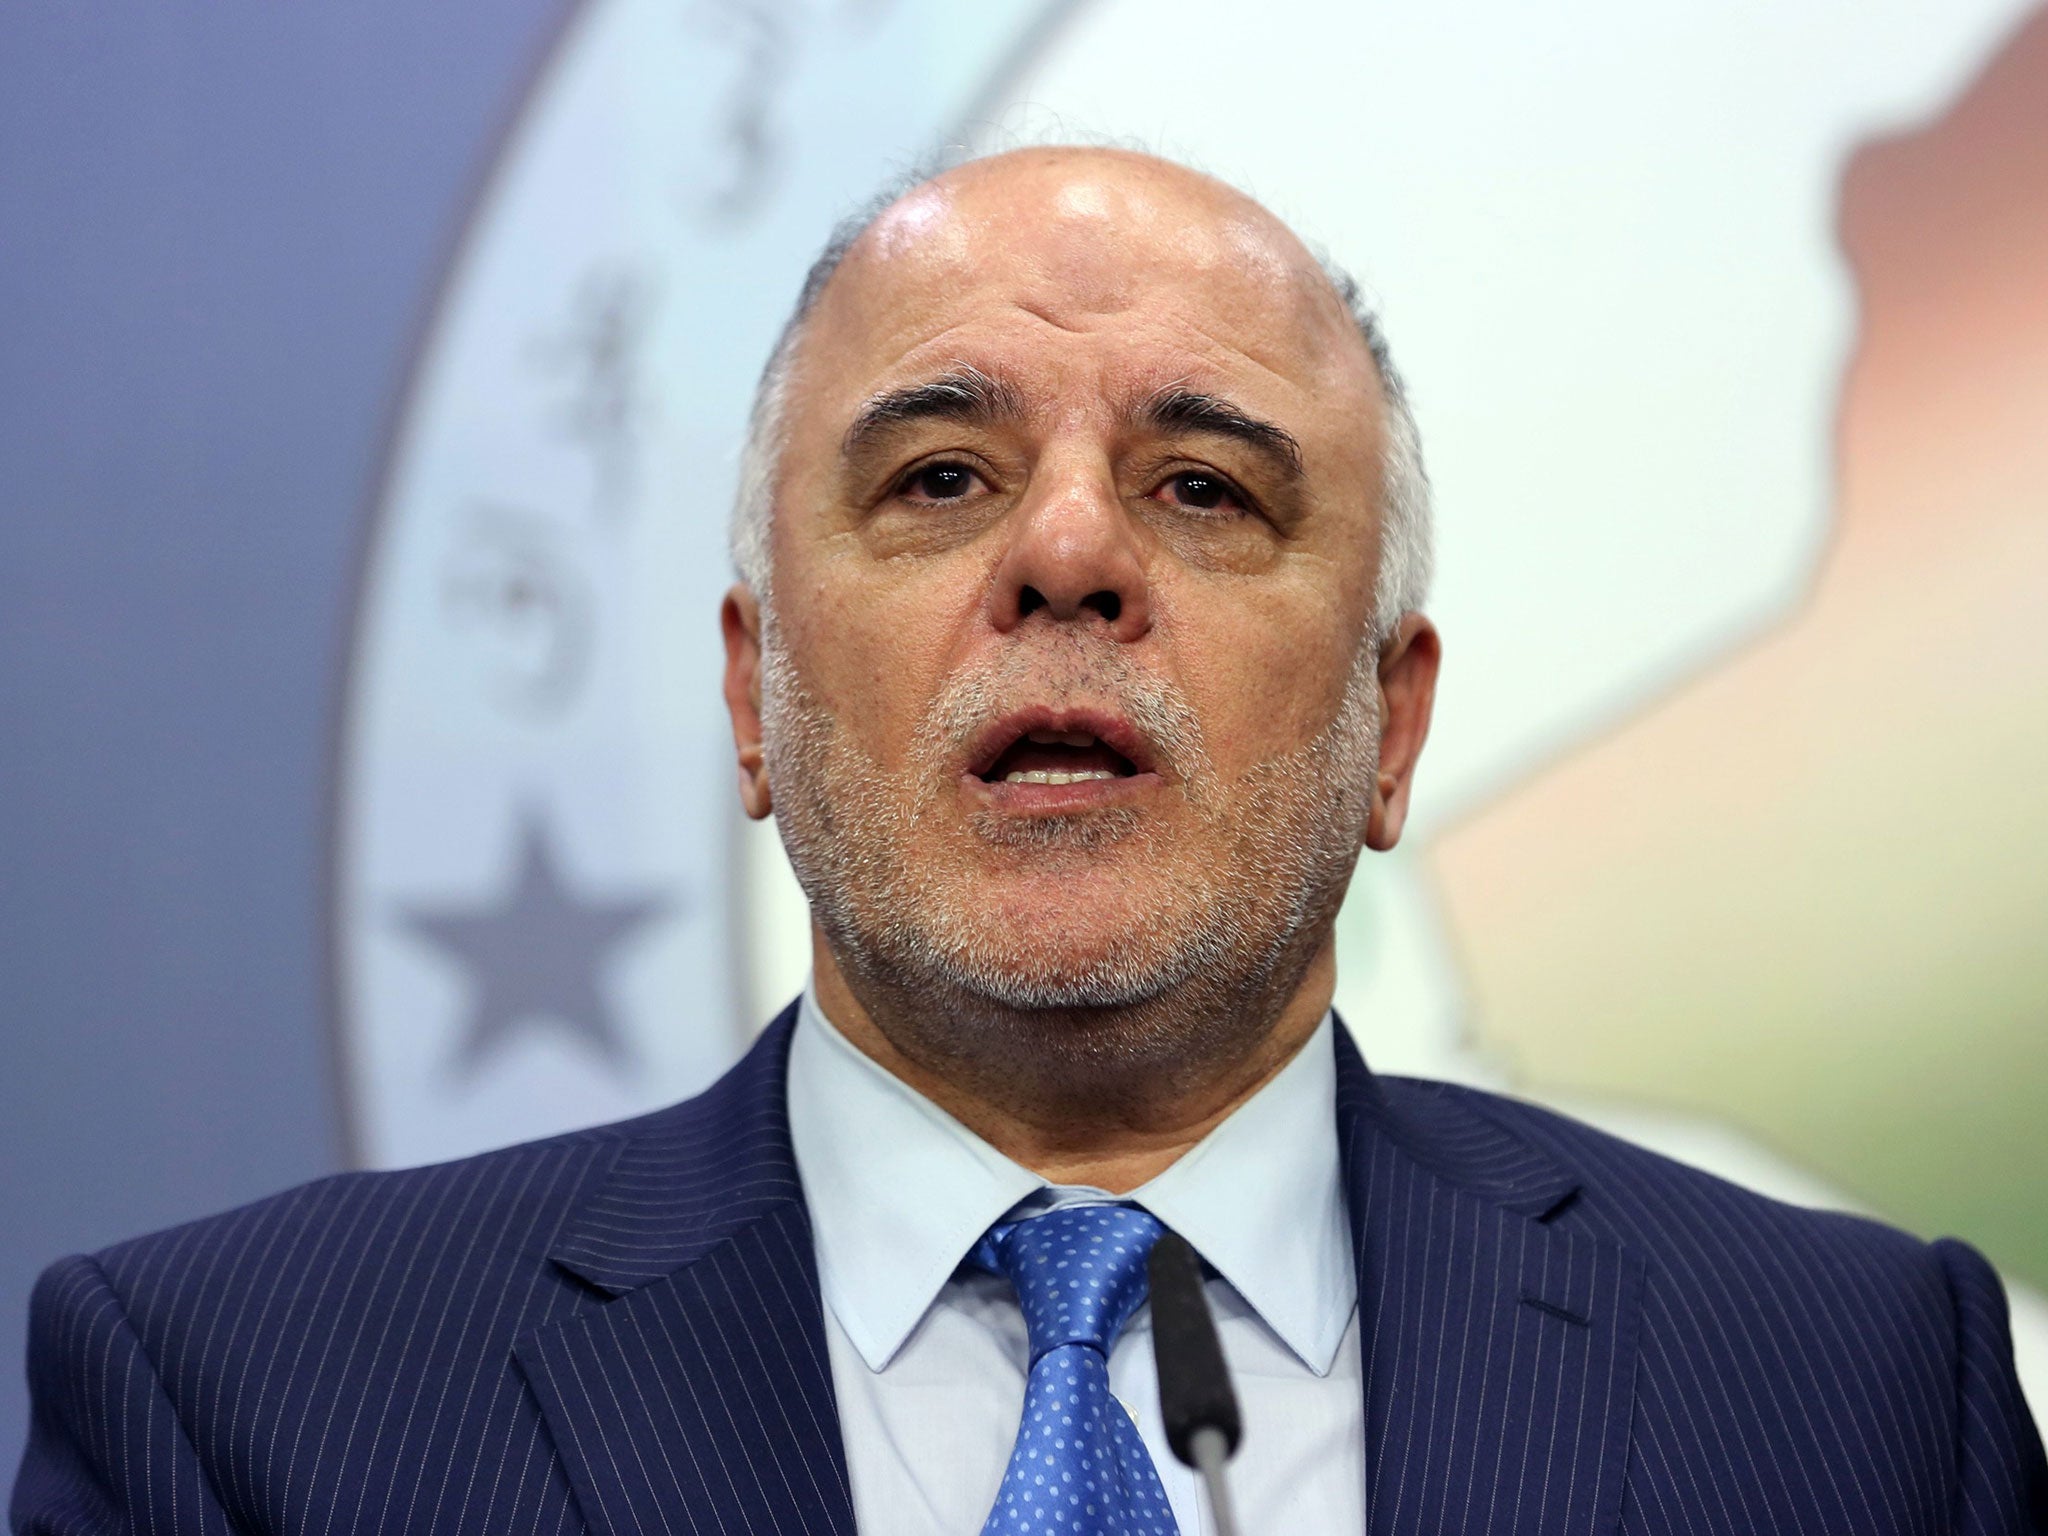 Haider Al-Abadi, the incoming Prime Minister, used to run a company repairing lifts